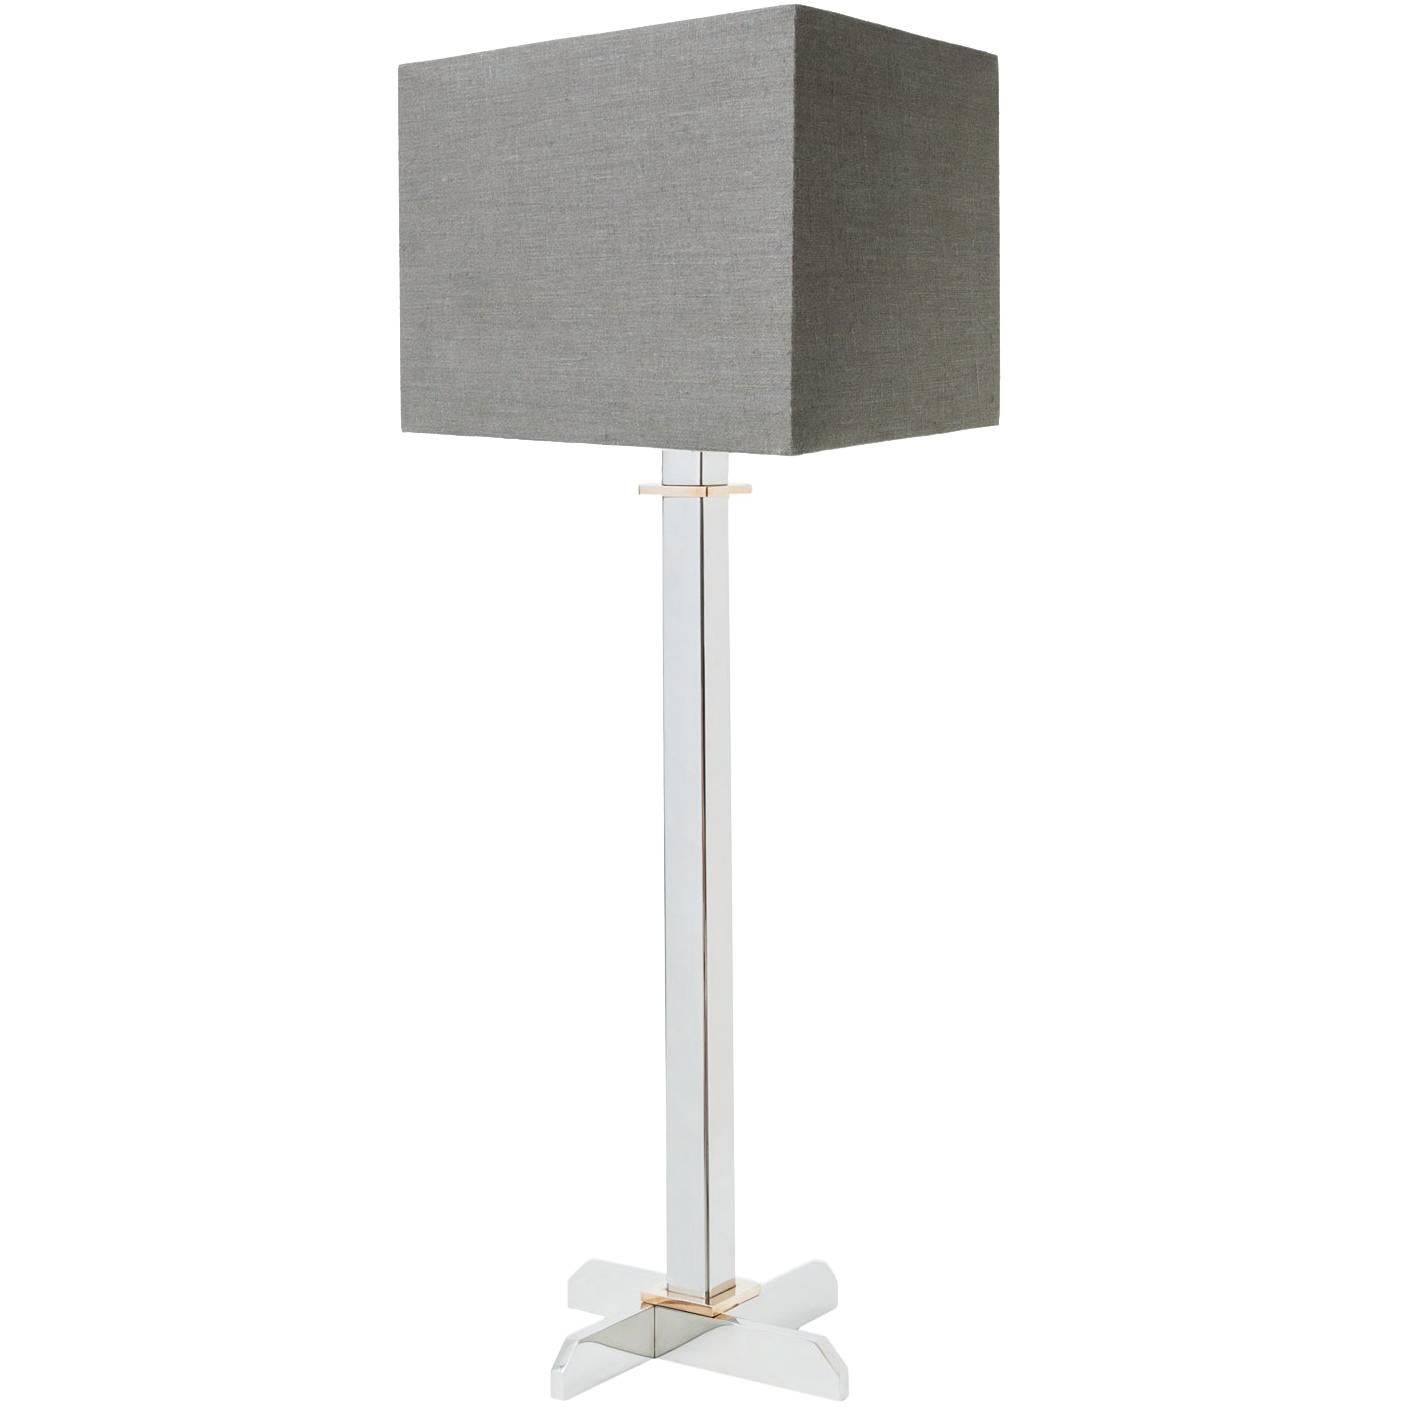 Modern Table Lamp in Stainless Steel and Bronze Details by Carbonell Design